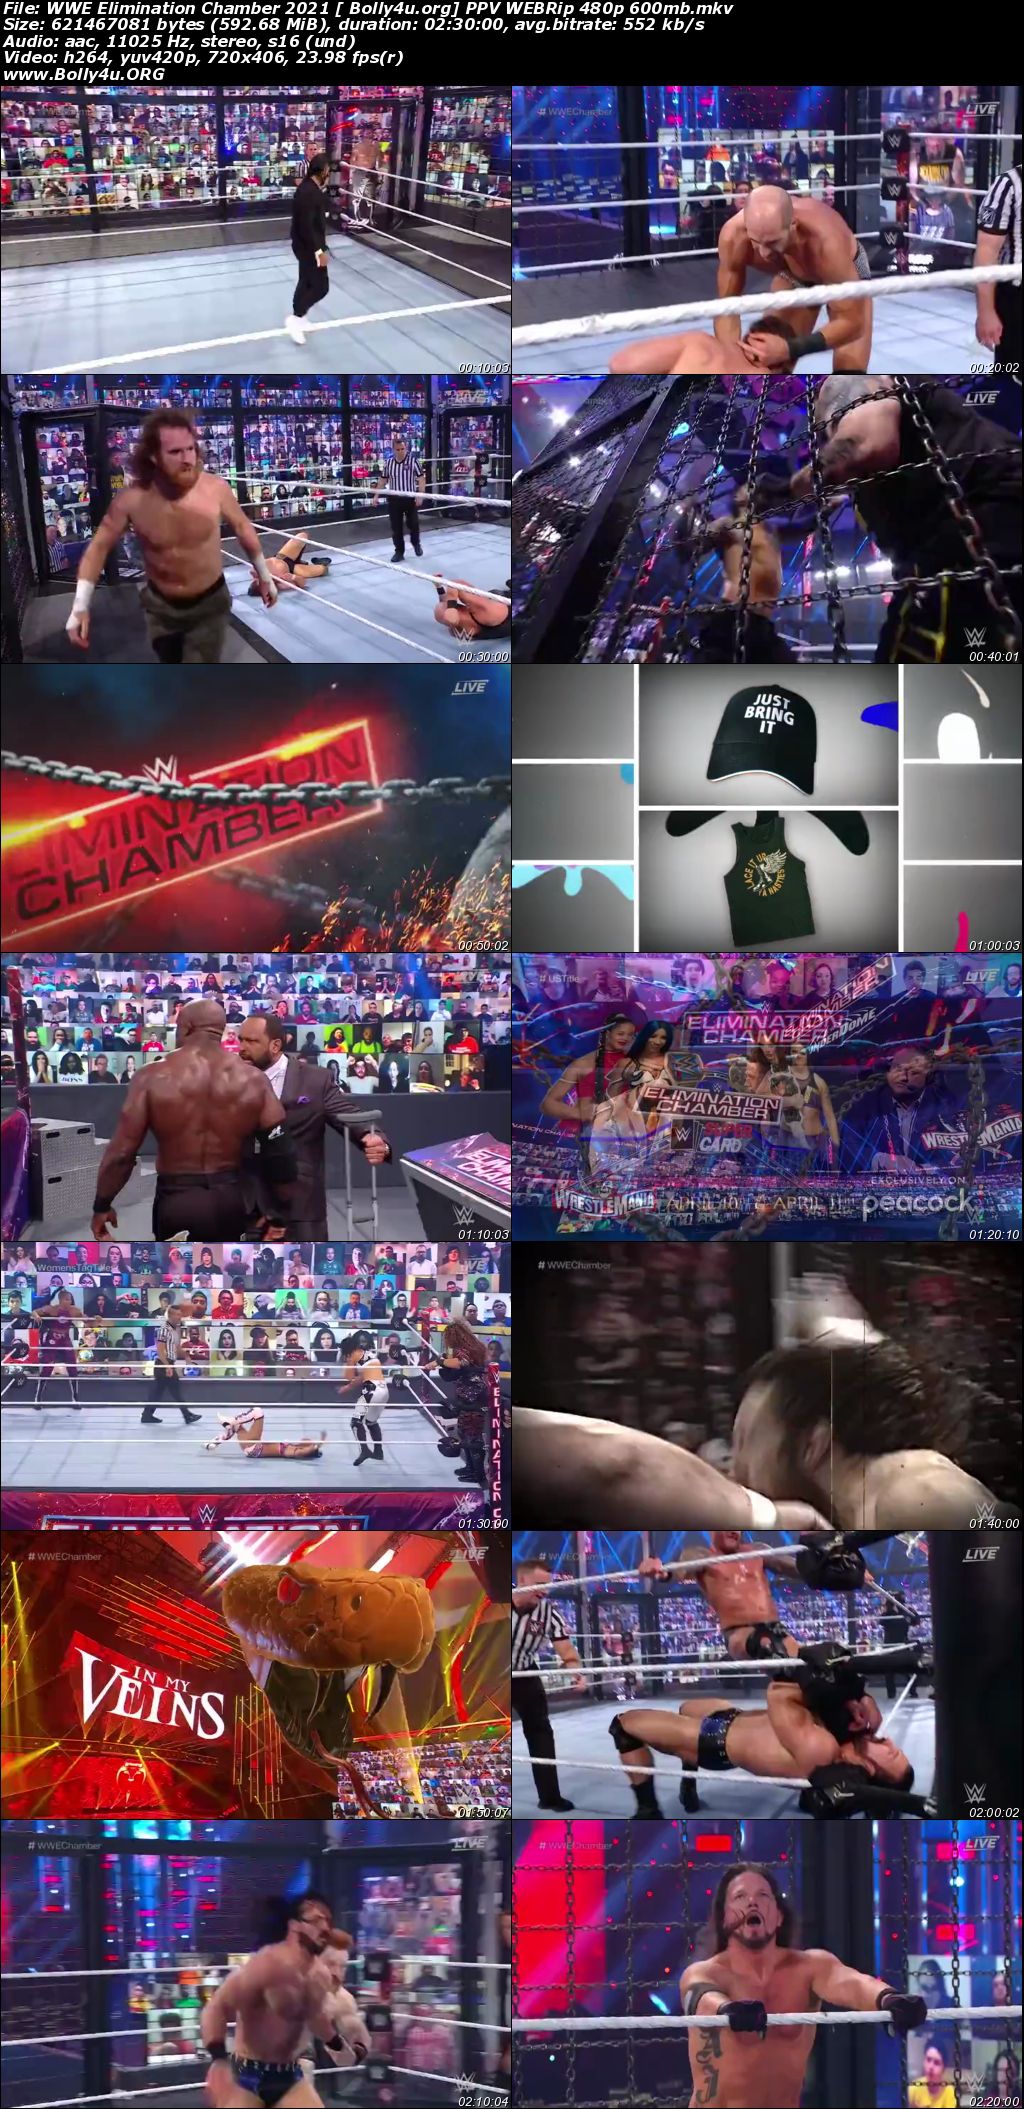 WWE Elimination Chamber 2021 PPV WEBRip 480p 600mb Download